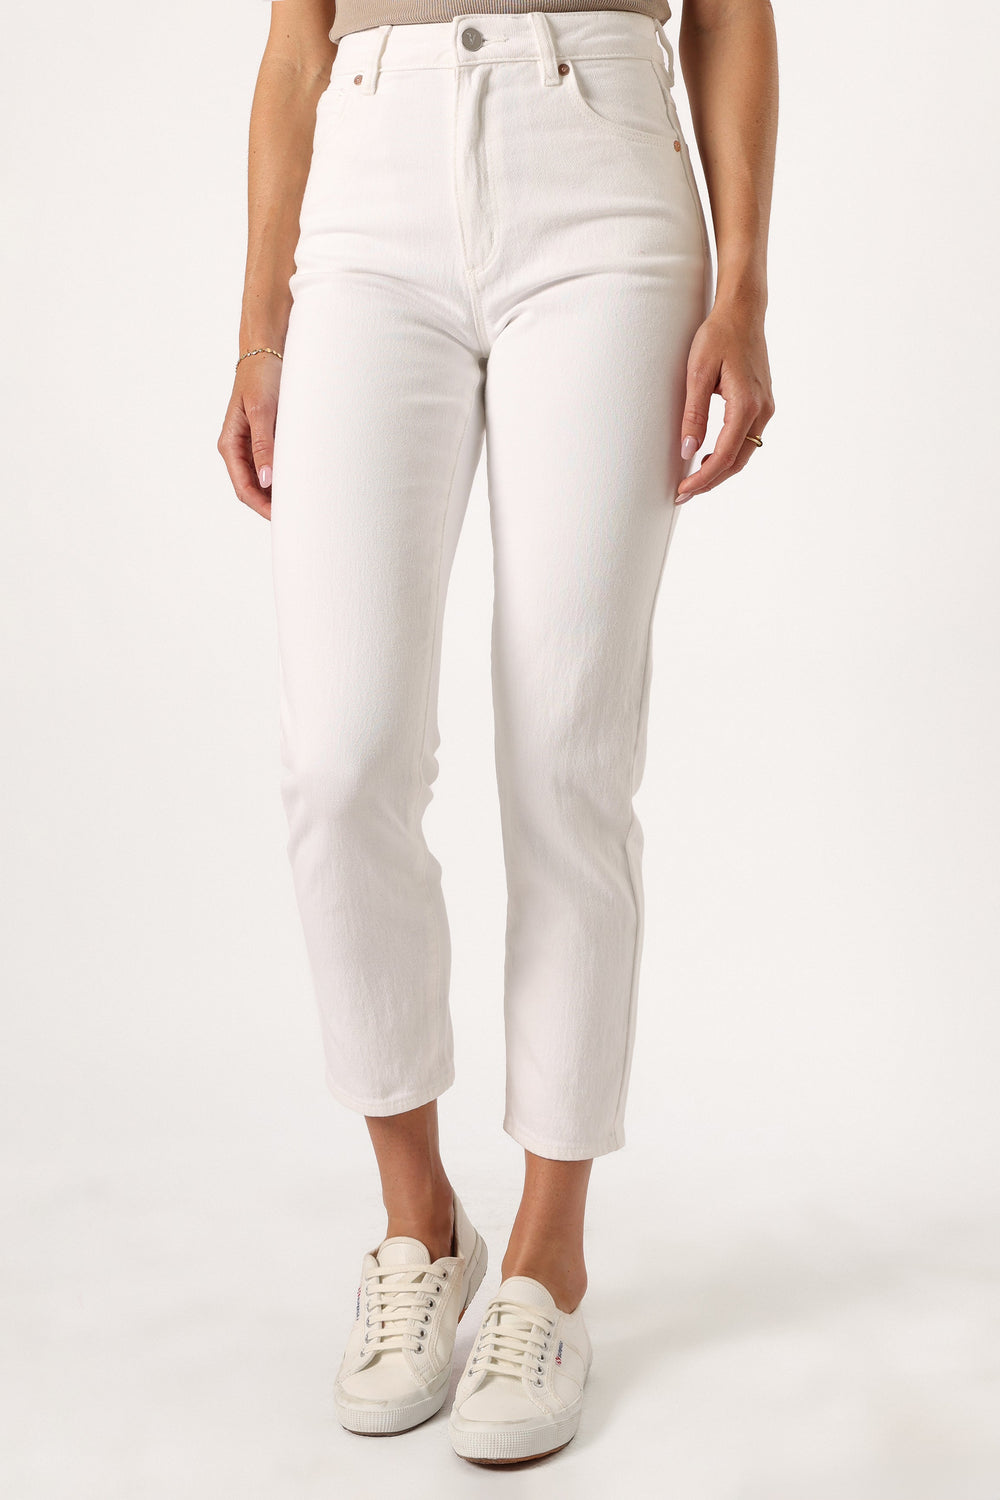 BOTTOMS @Abrand 94 High Slim Jeans - Pearl